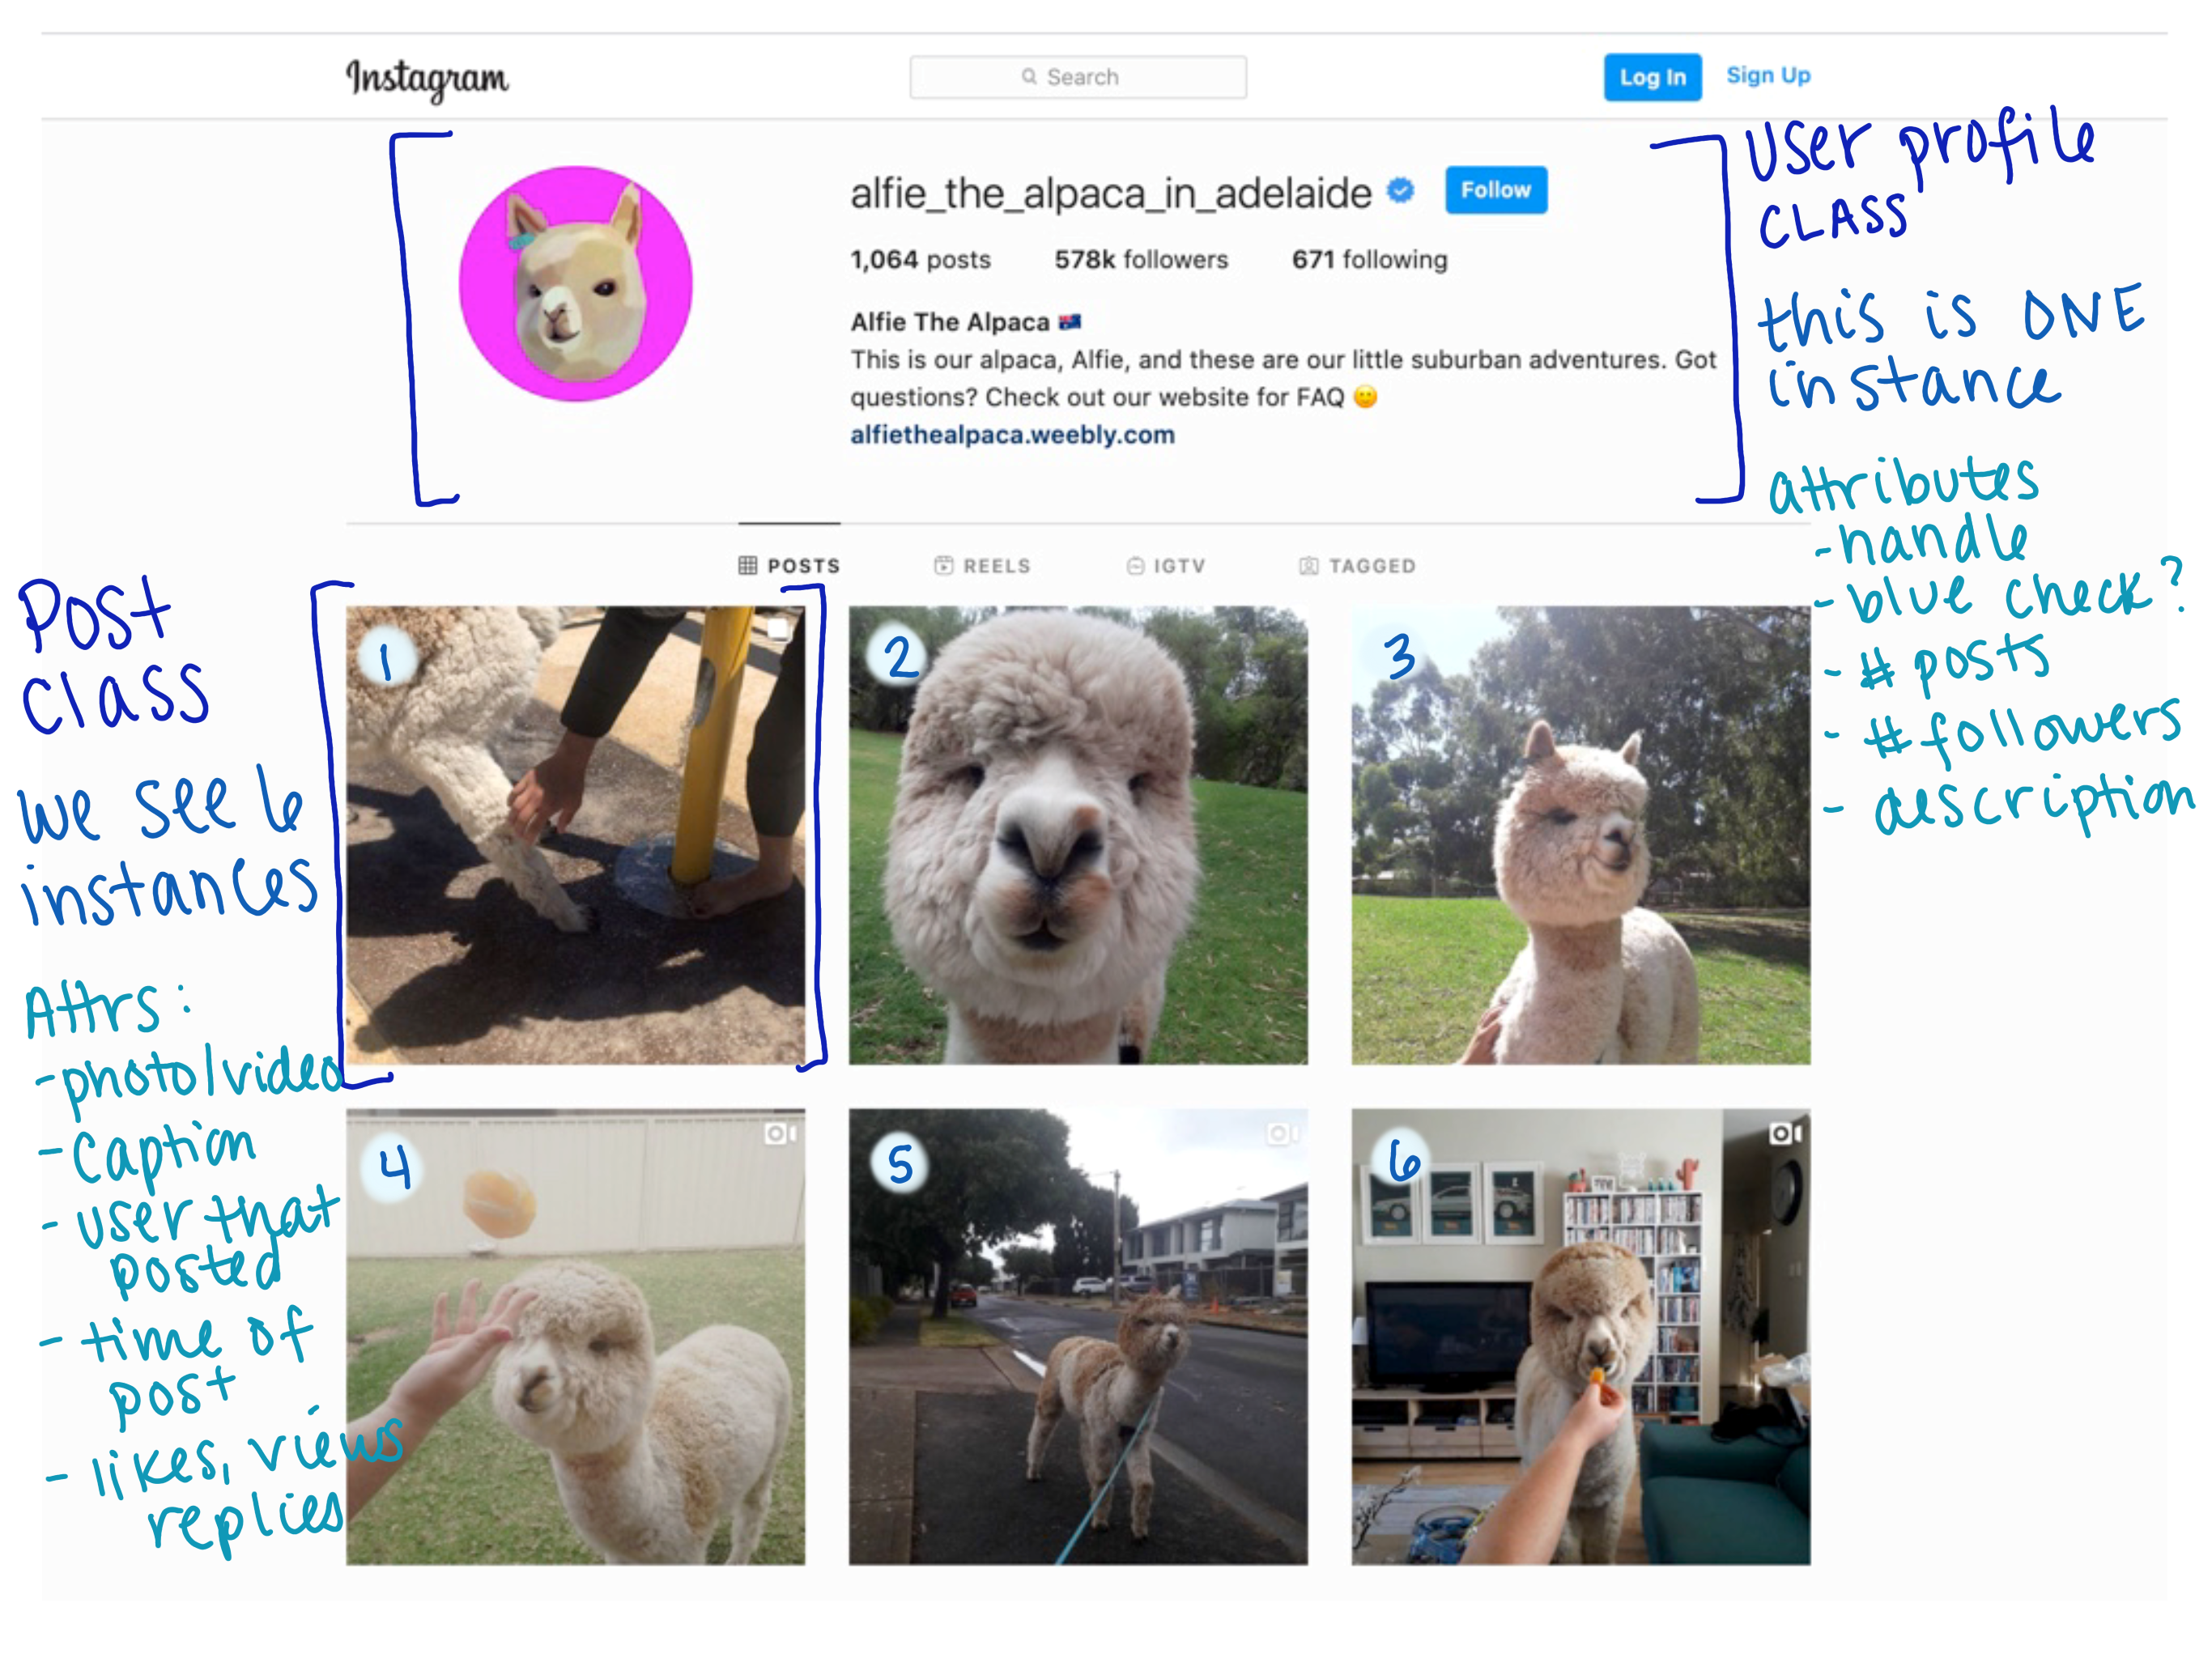 Instagram screenshot with annotations for user profile class and post class.